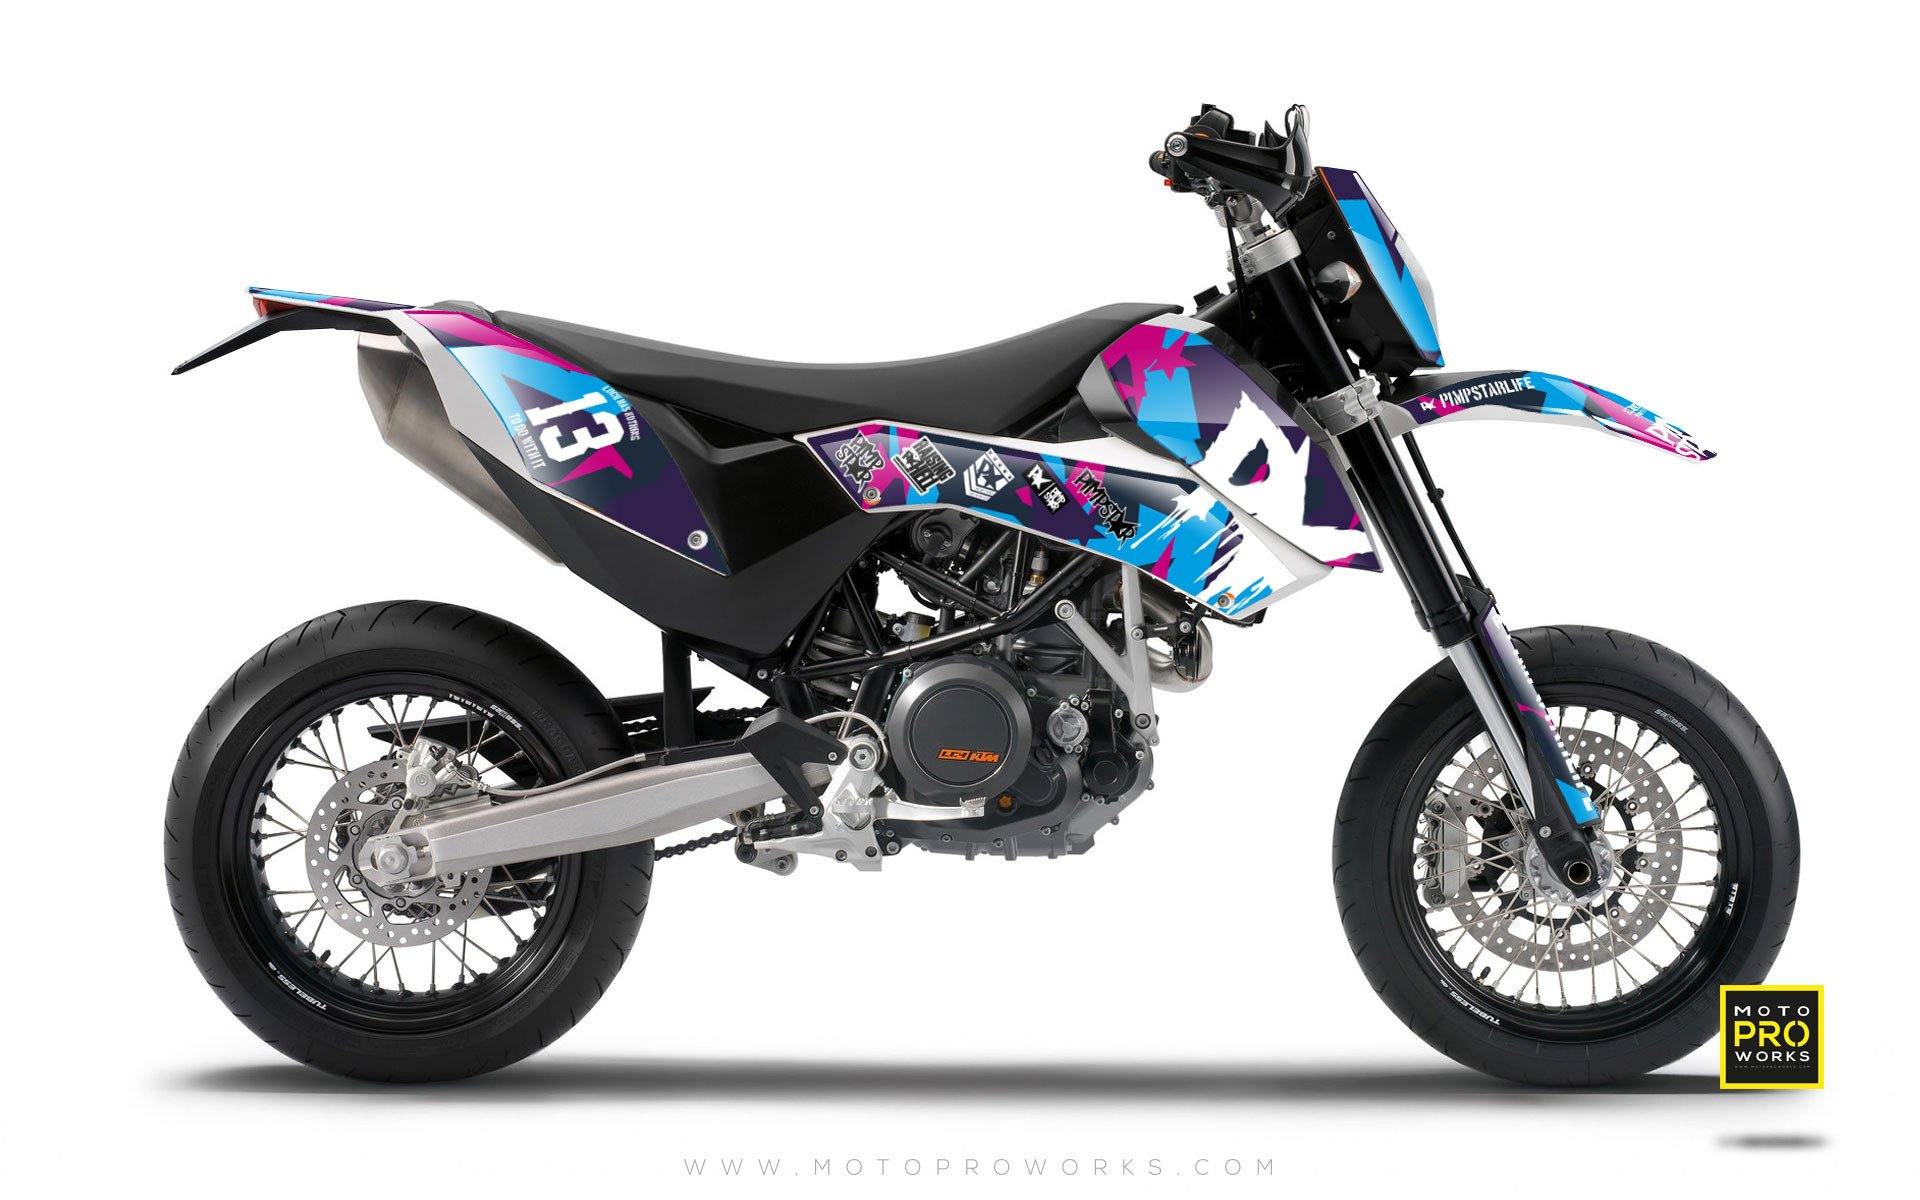 KTM GRAPHIC KIT - "M90" (candy) - MotoProWorks | Decals and Bike Graphic kit